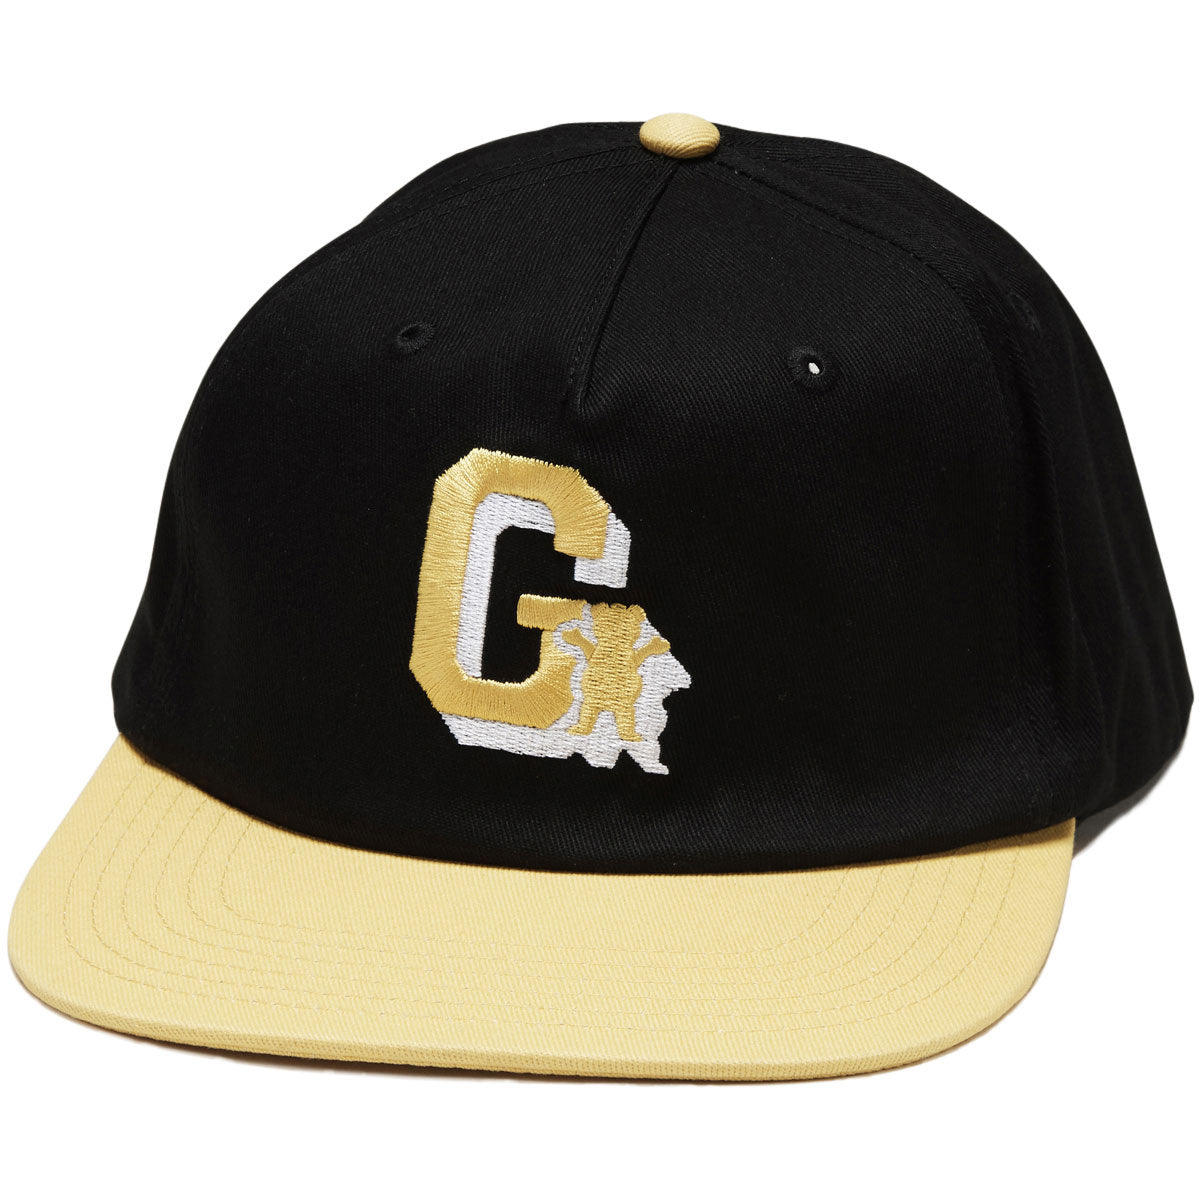 Grizzly Midfield Unstructured Strapback Hat - Black image 1